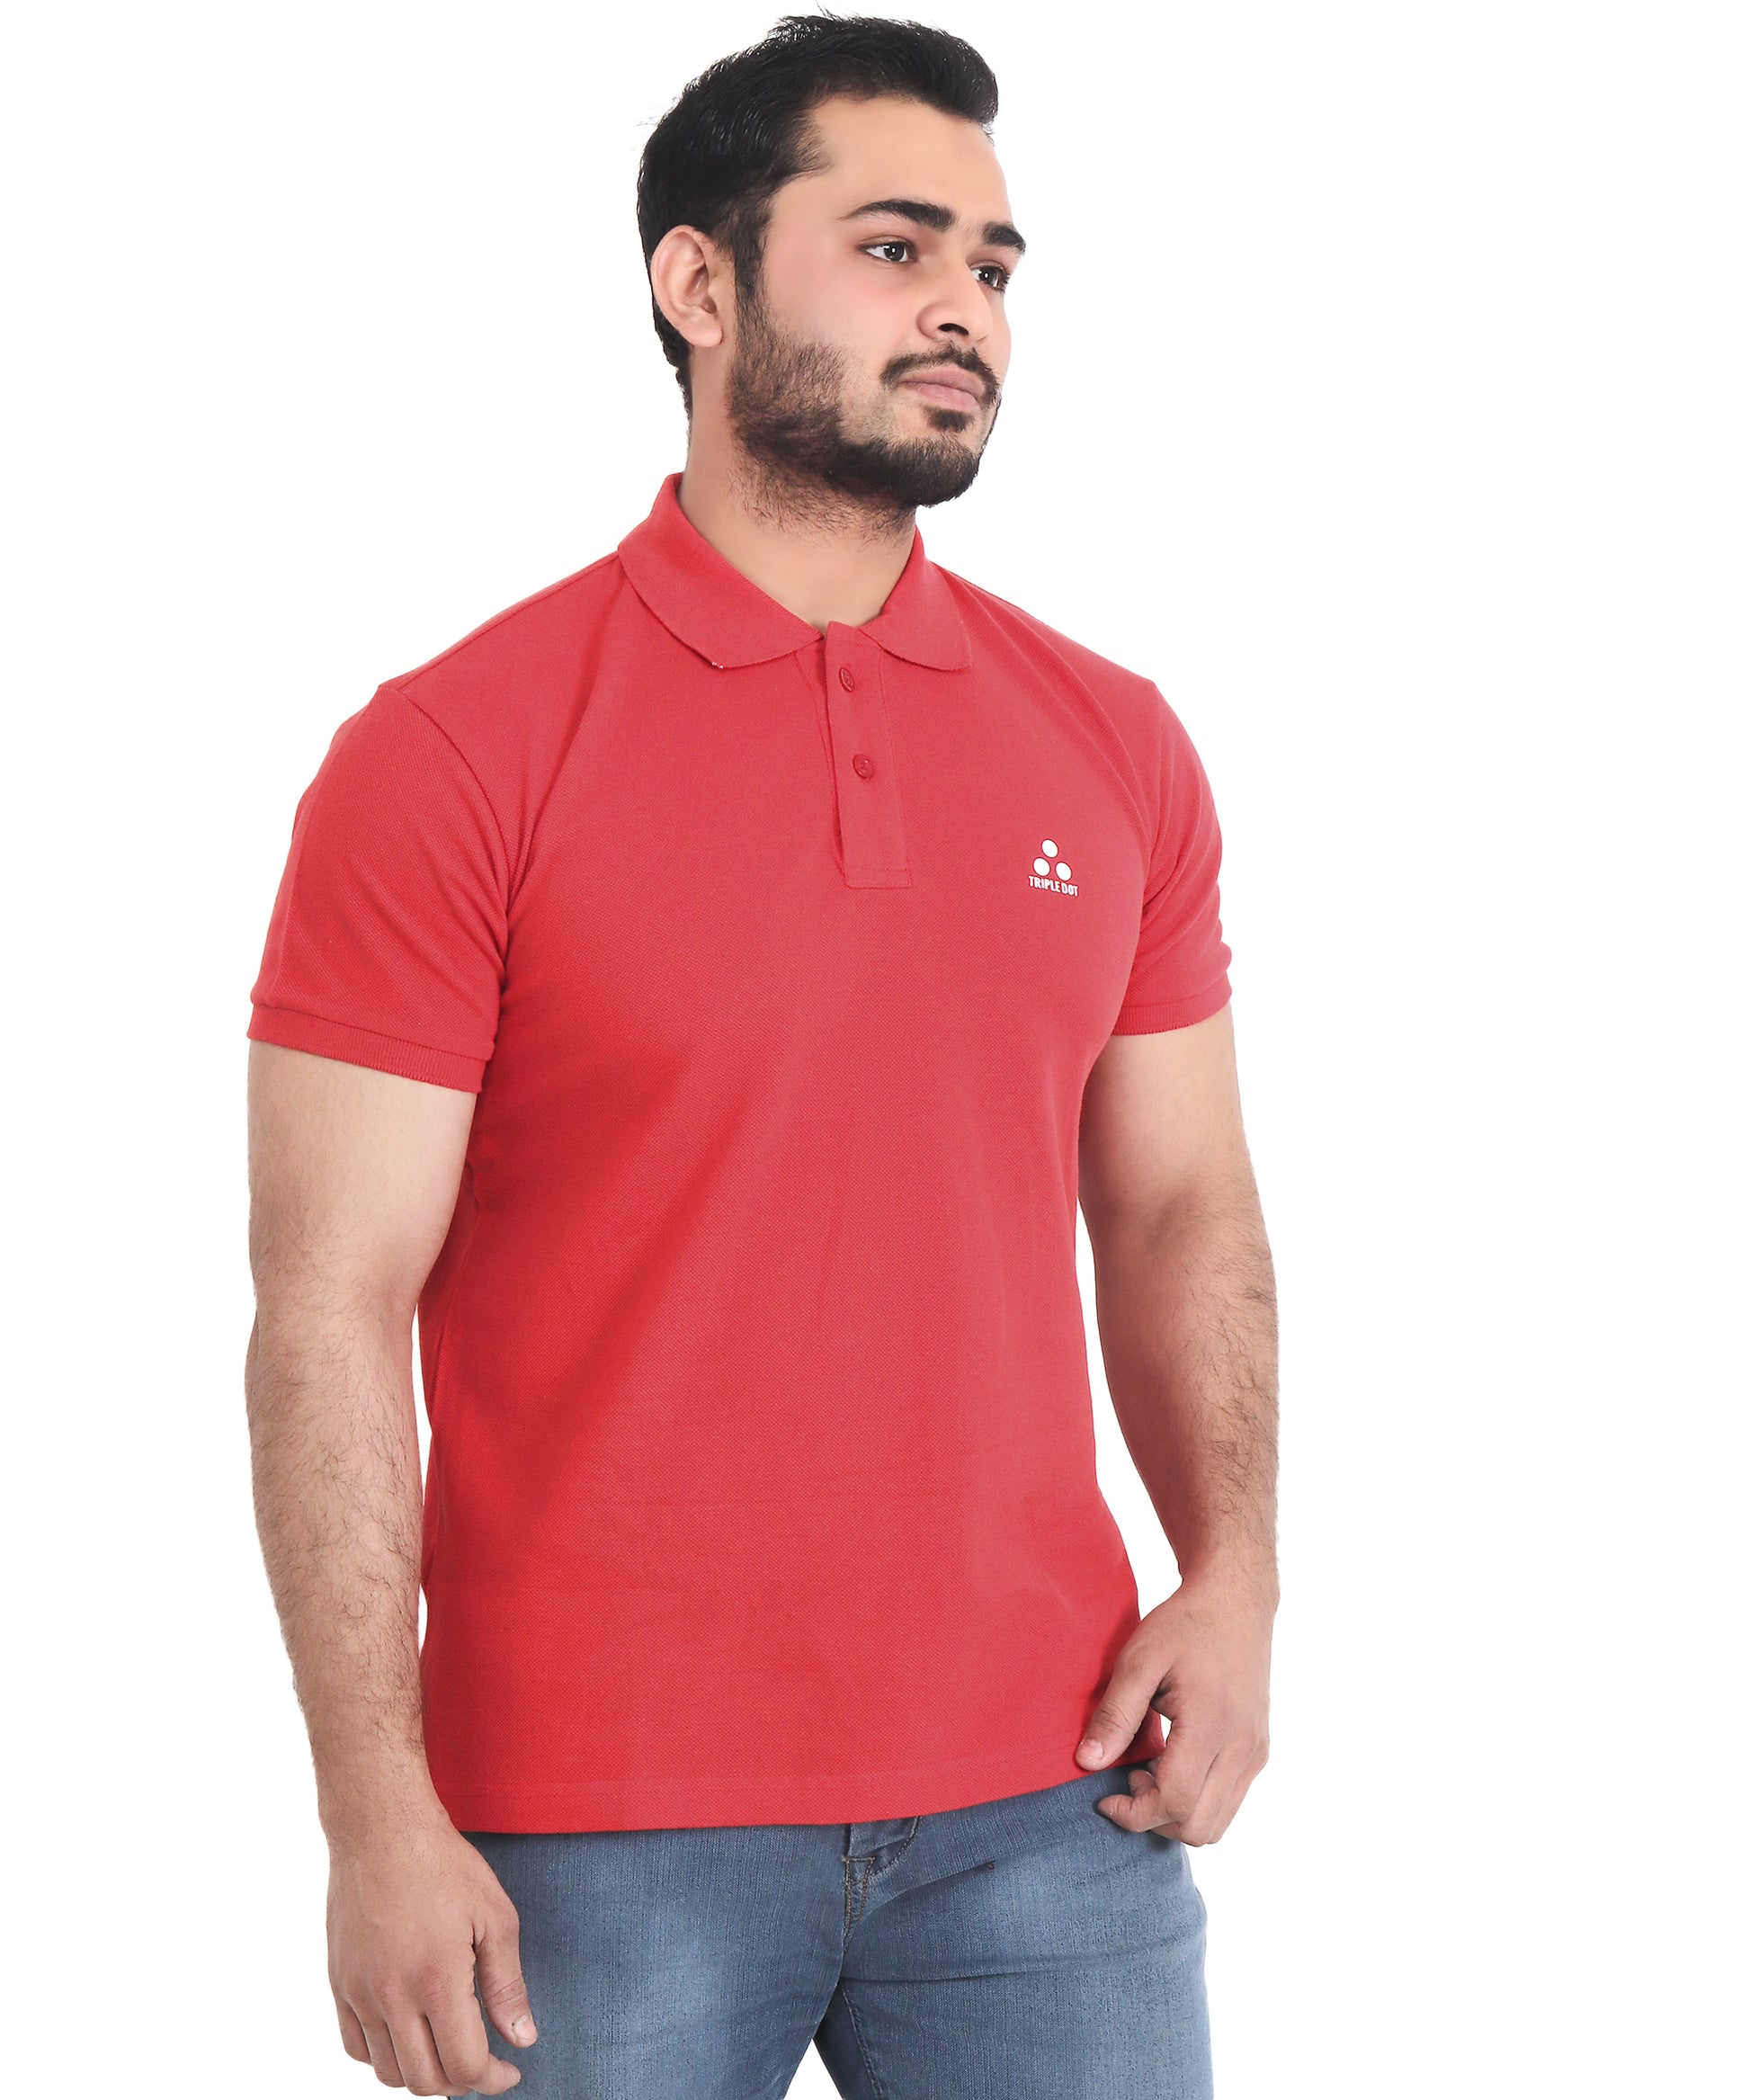 Solid Red Poly Cotton Regular Fit Men's T-Shirt - Triple Dot Clothings